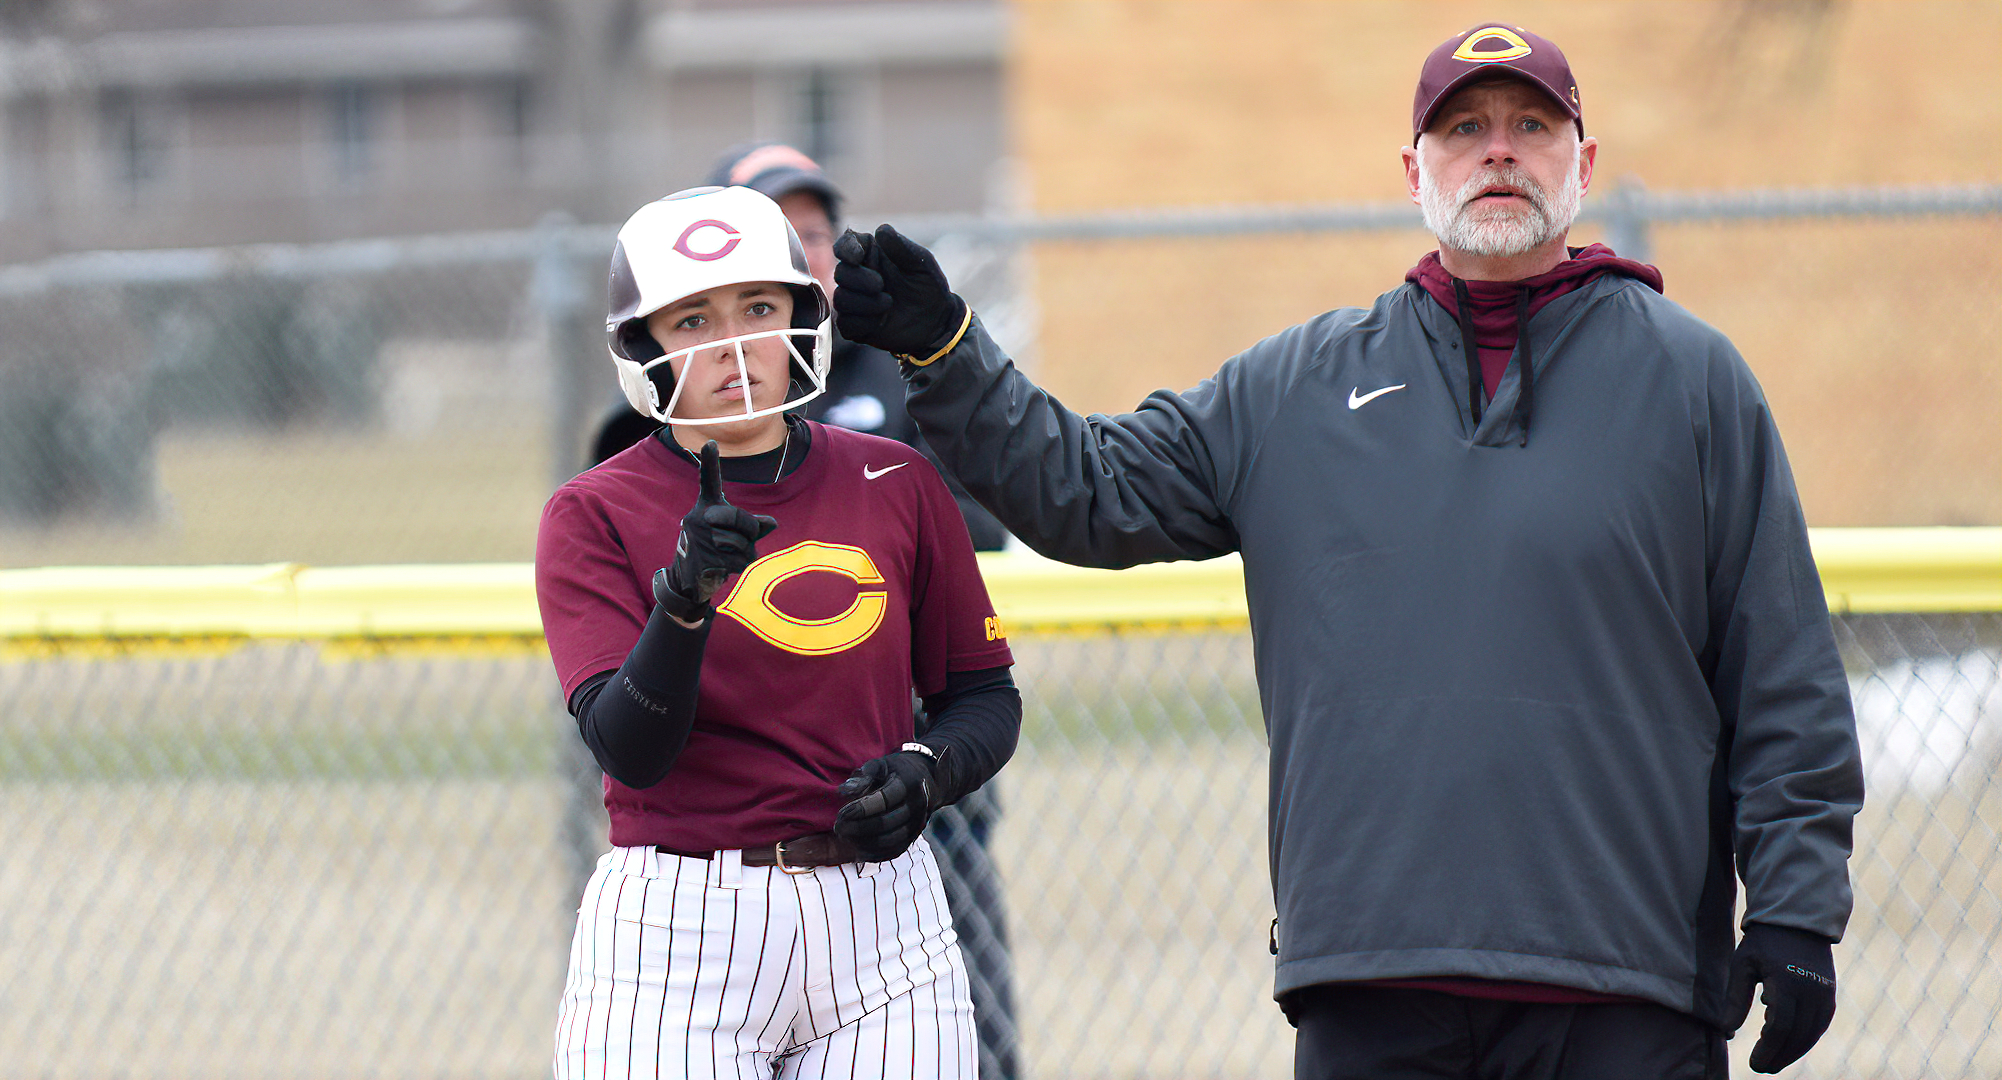 Kailee Falconer had a hit in both games of the Cobbers' conference opener at Gustavus. She went 3-for-6 and is hitting .472 for the year.